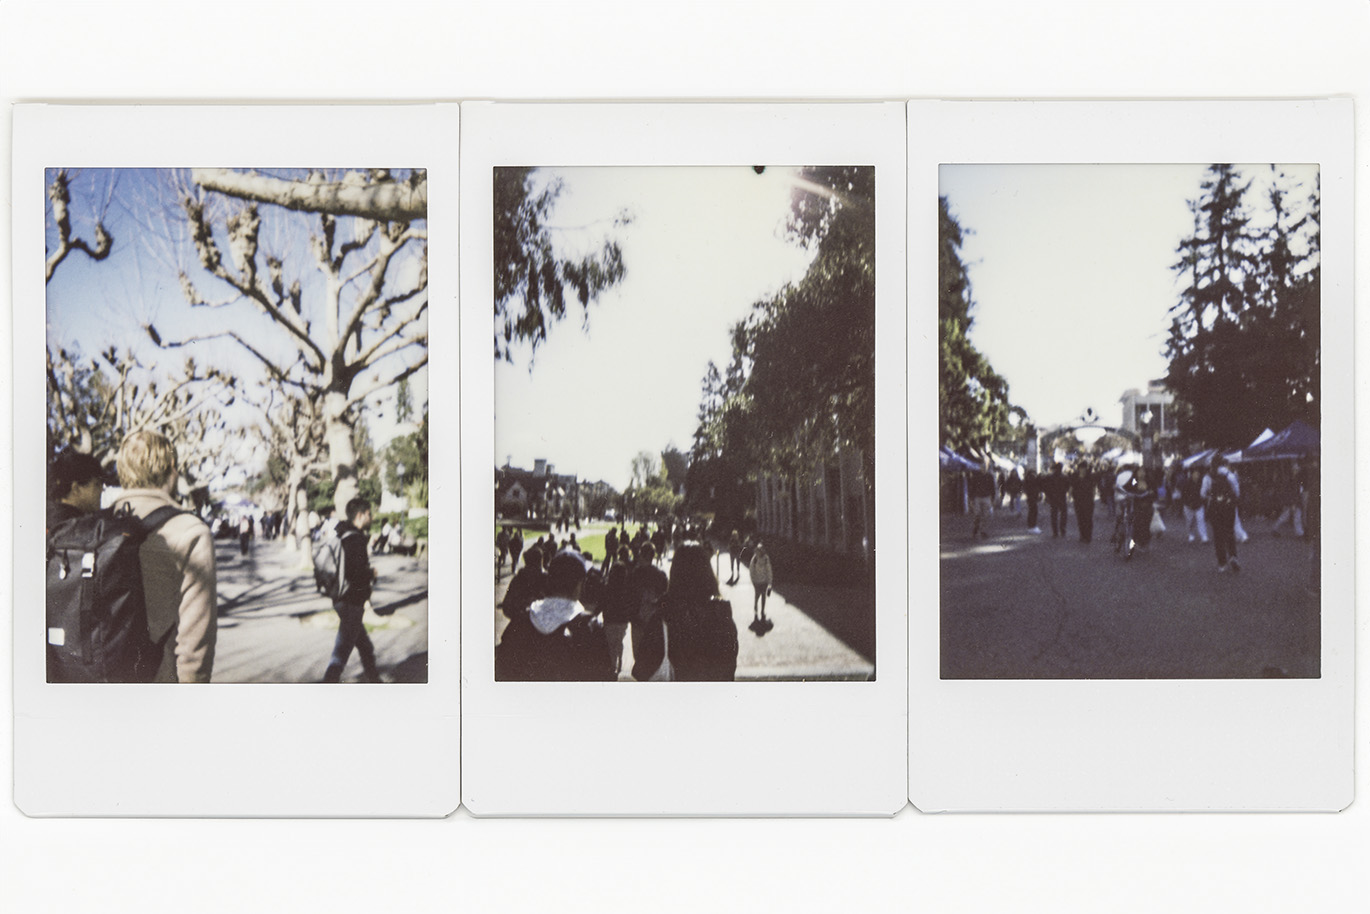 Set of three scanned polaroid photos showing scenes with students from the UC Berkley campus.